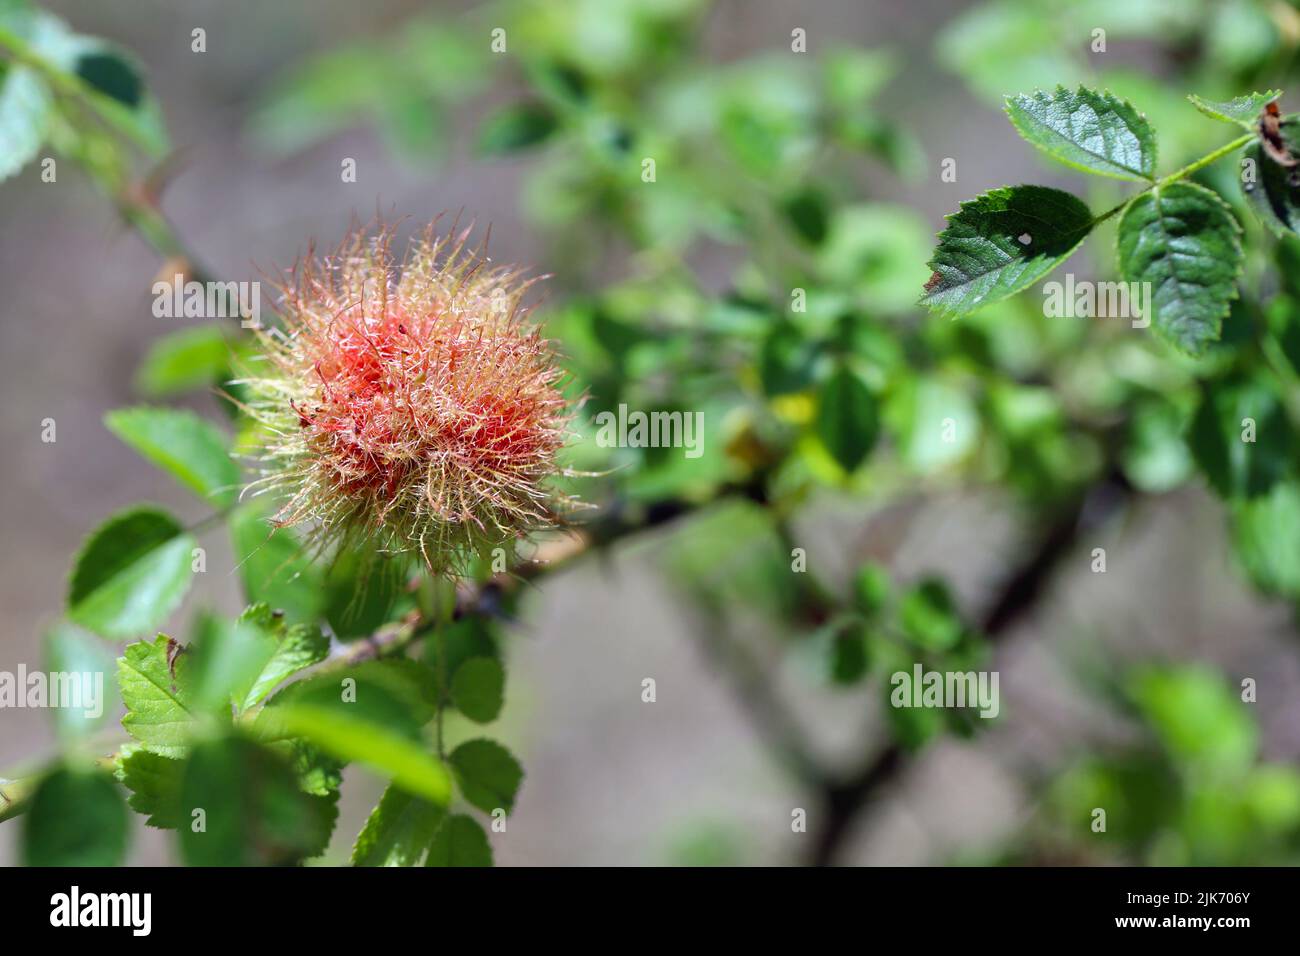 Rose bedeguar gall, Robin's pincushion gall, moss galls (Diplolepis rosae) on rose. Stock Photo